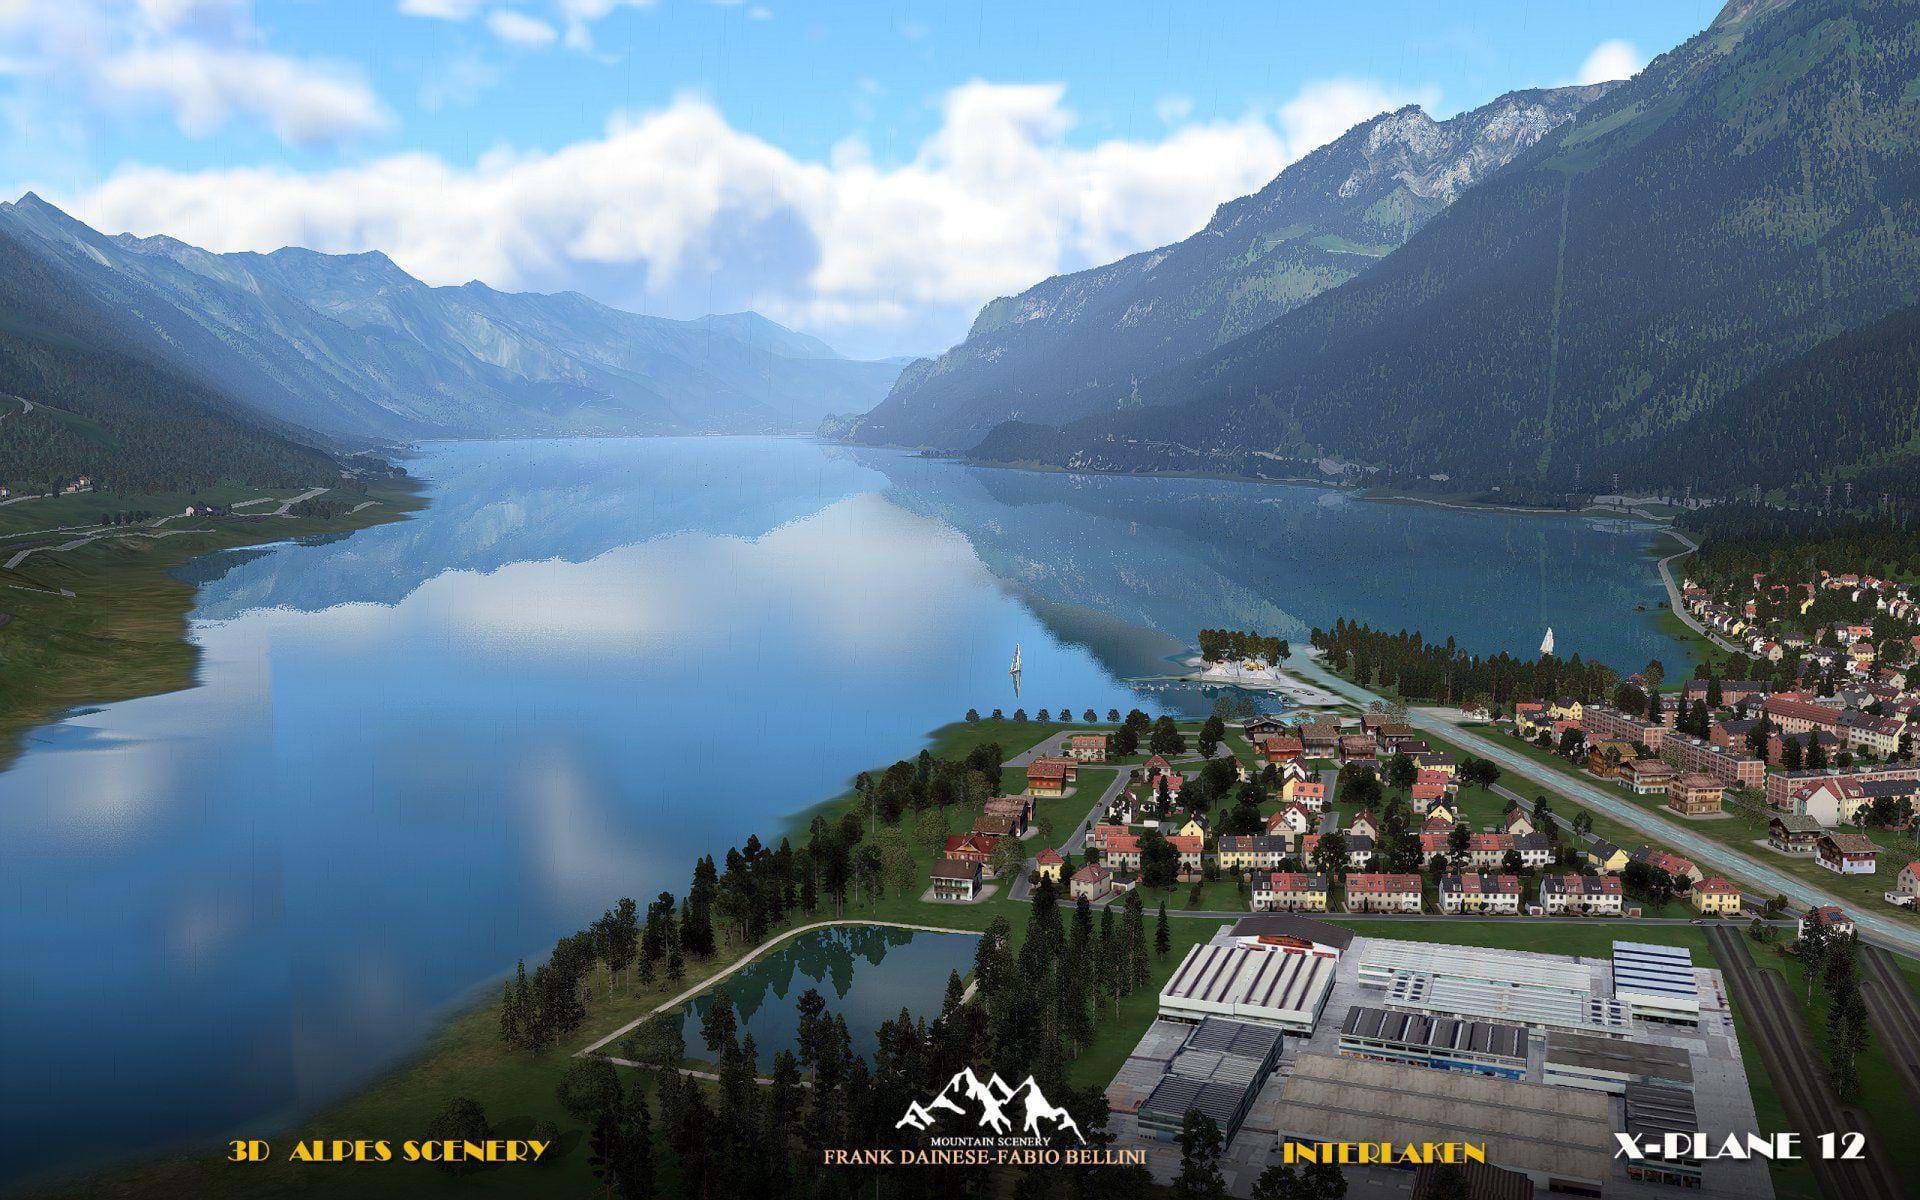 Frank Dainese and Fabio Bellini announced 3D Alps scenery for X-Plane 12